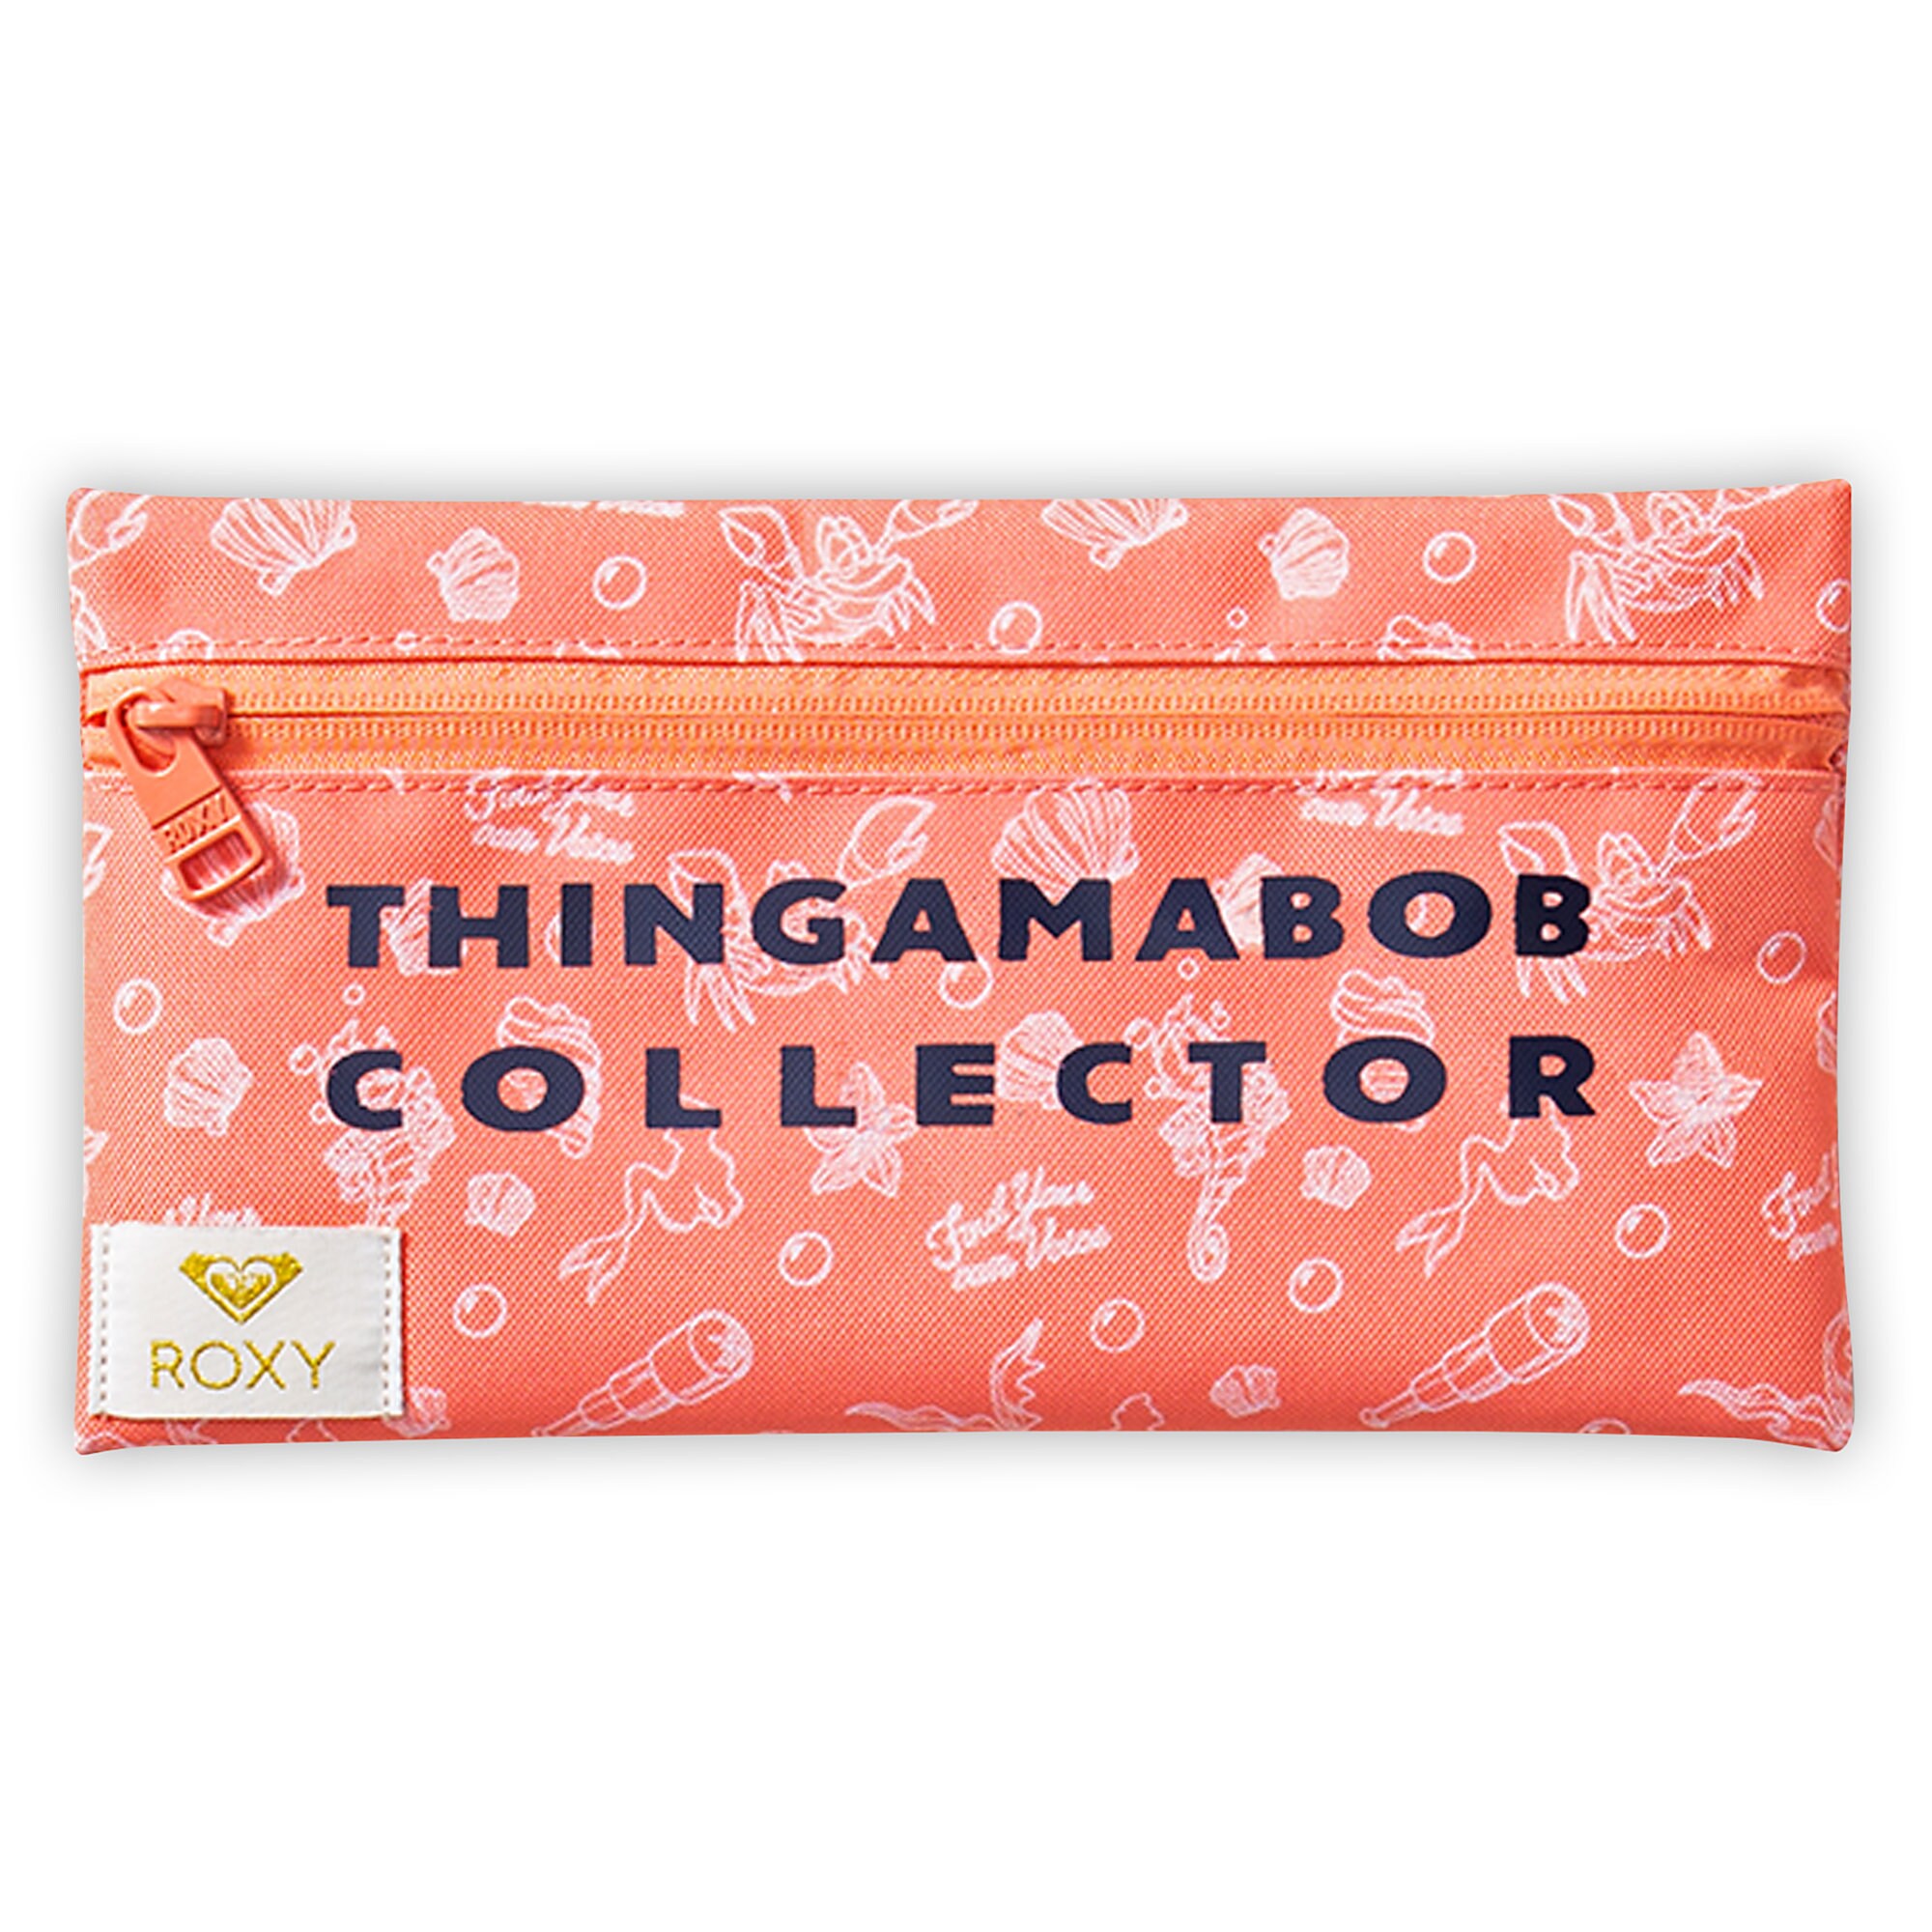 The Little Mermaid ''Thingamabob Collector'' Pencil Case by ROXY Girl